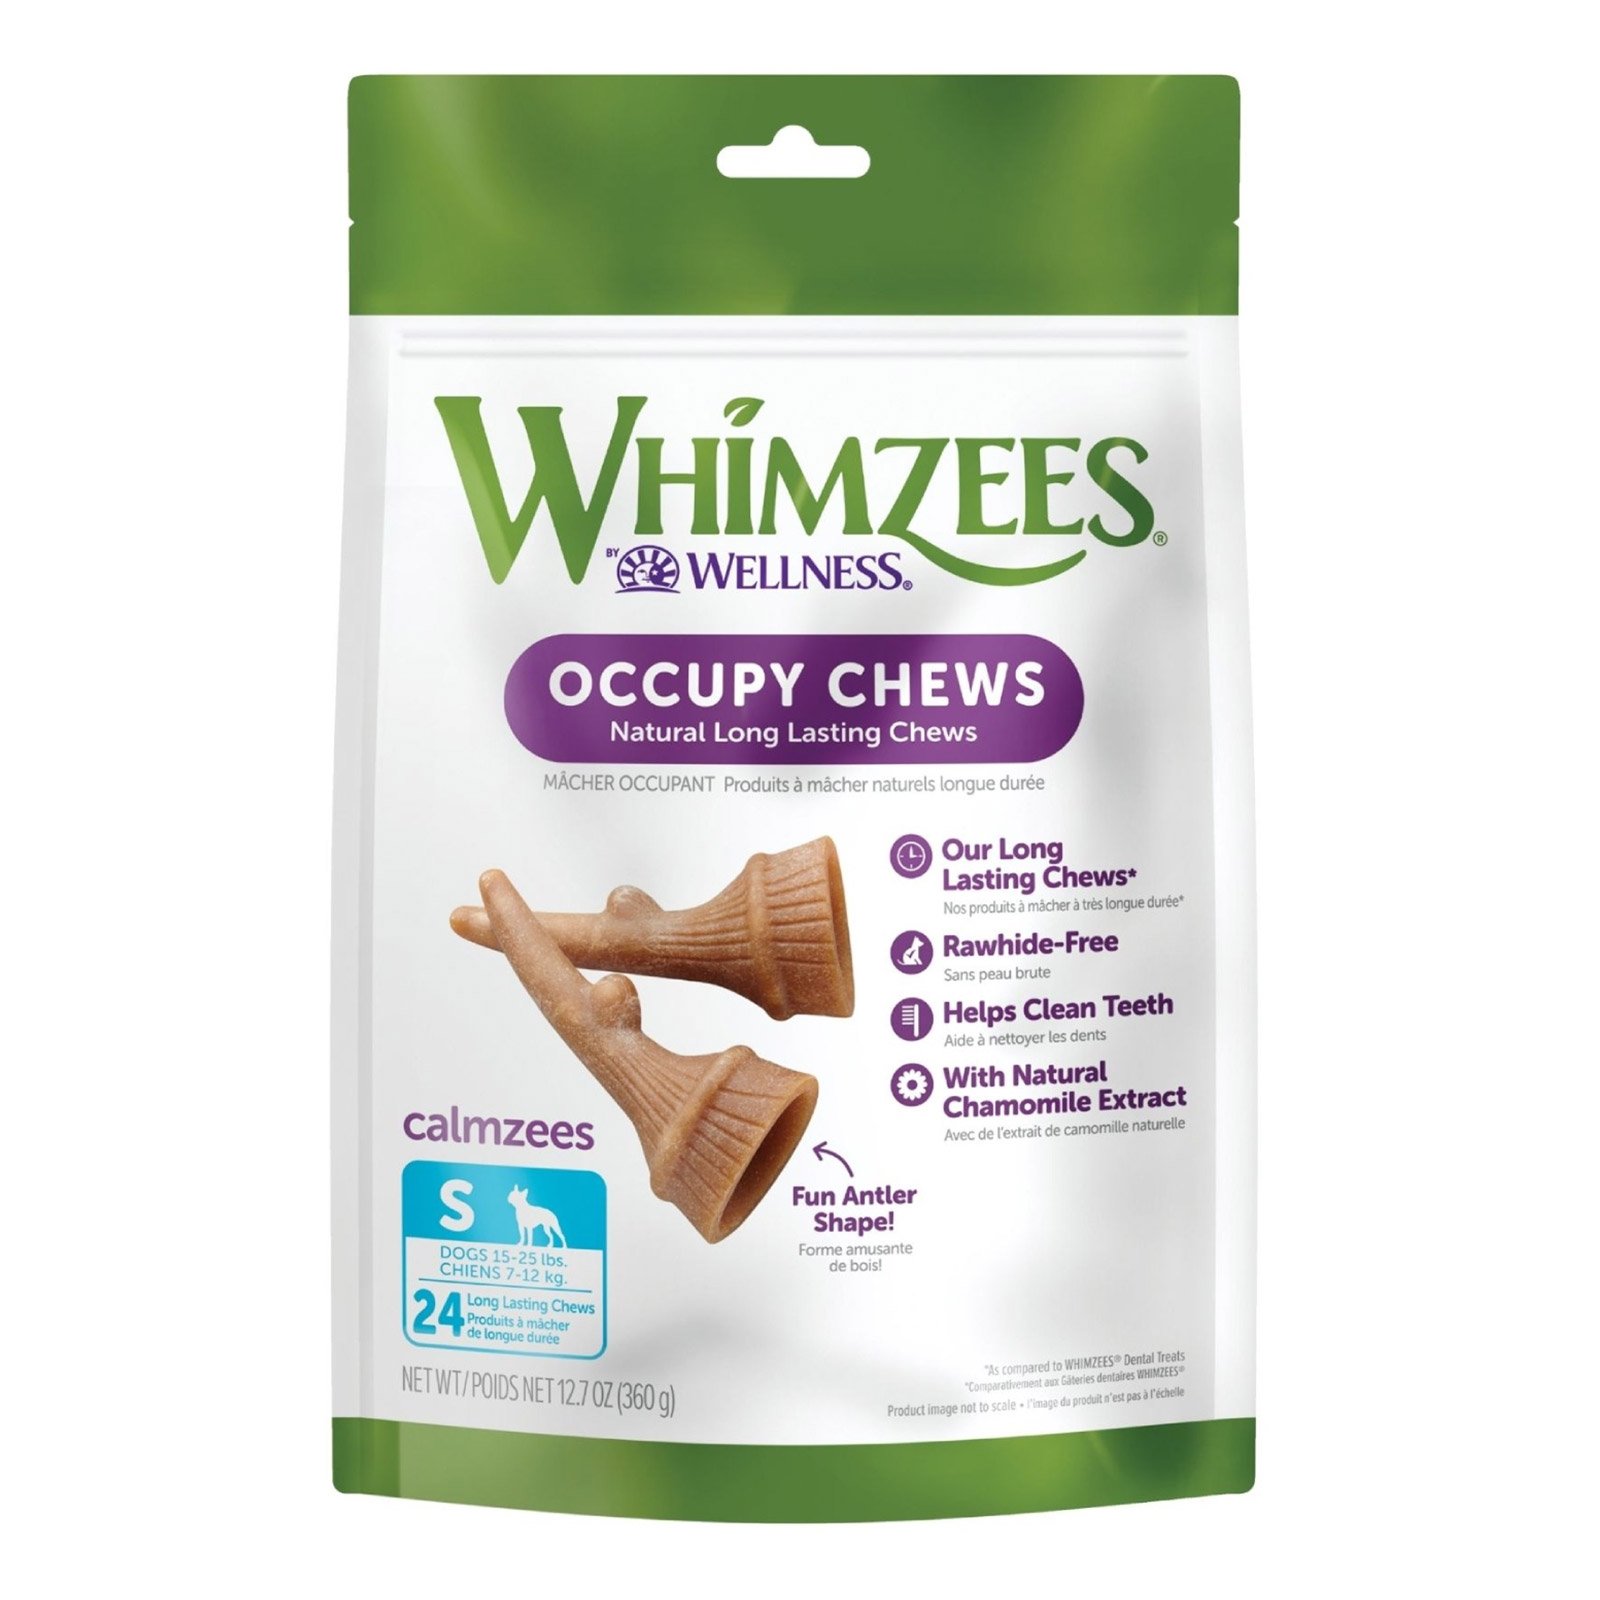 Whimzees Occupy Calmzees Antler Value Bag Dog Dental Treats